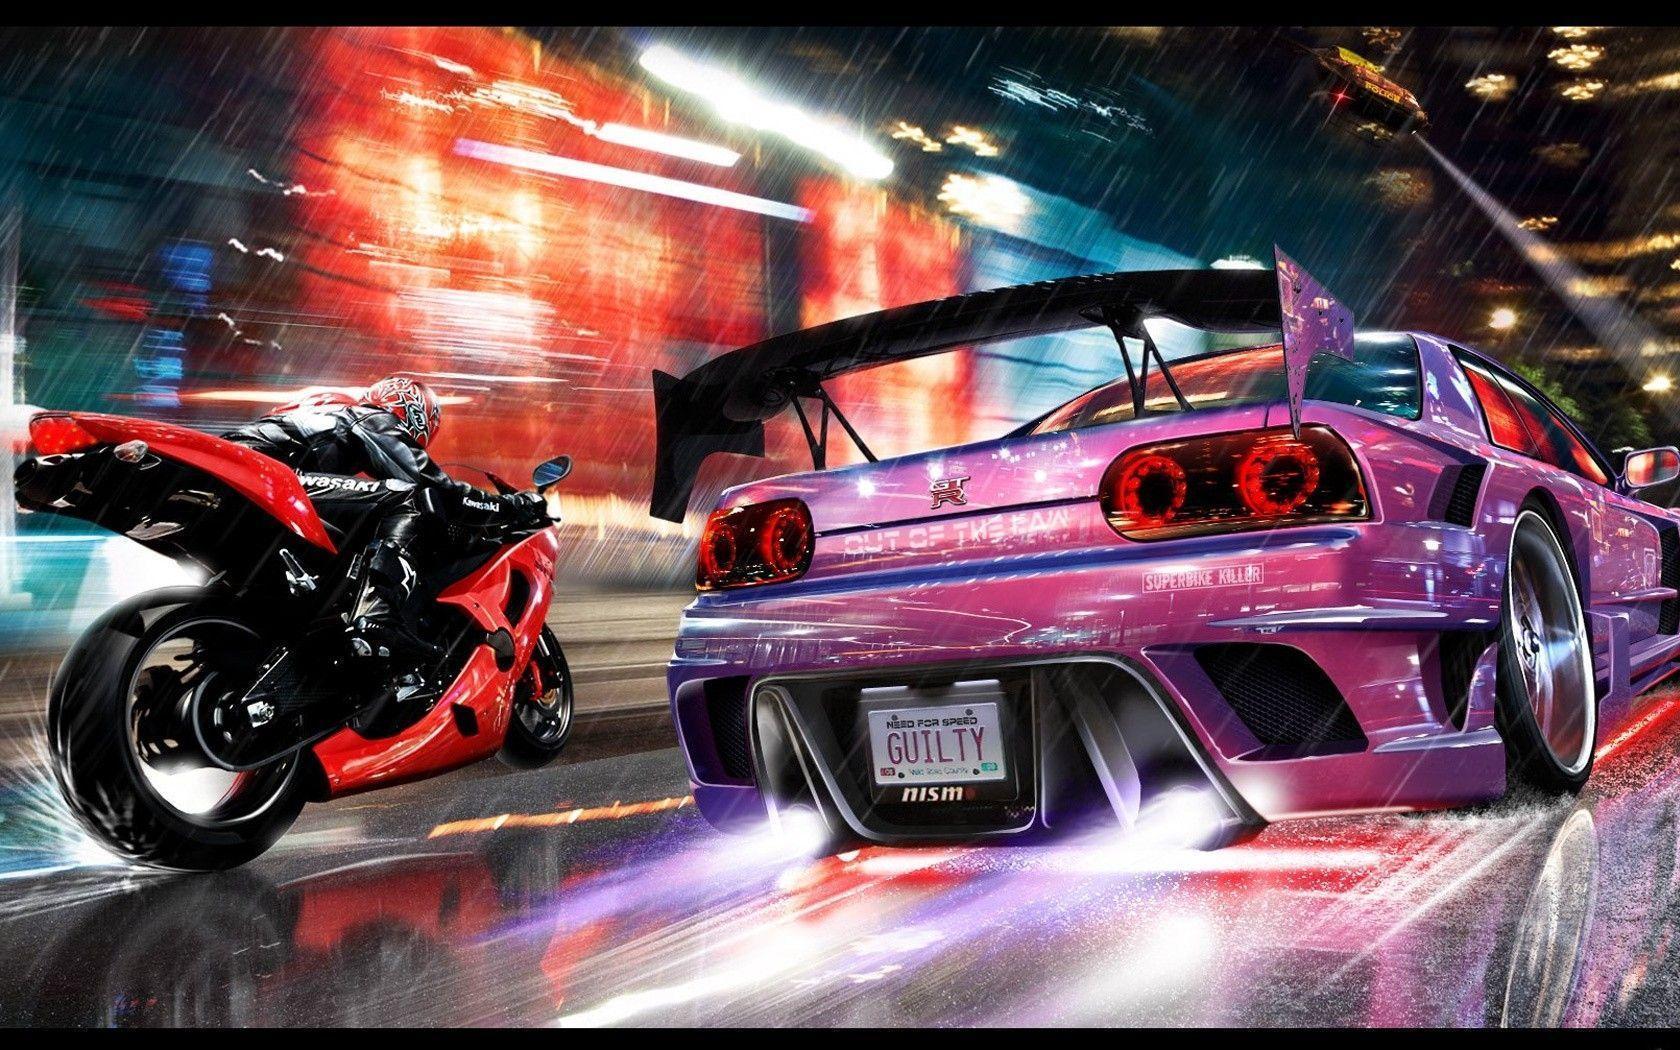 Download Wallpaper 1680x1050 Nfs, Need for speed, Motorcycle, Car